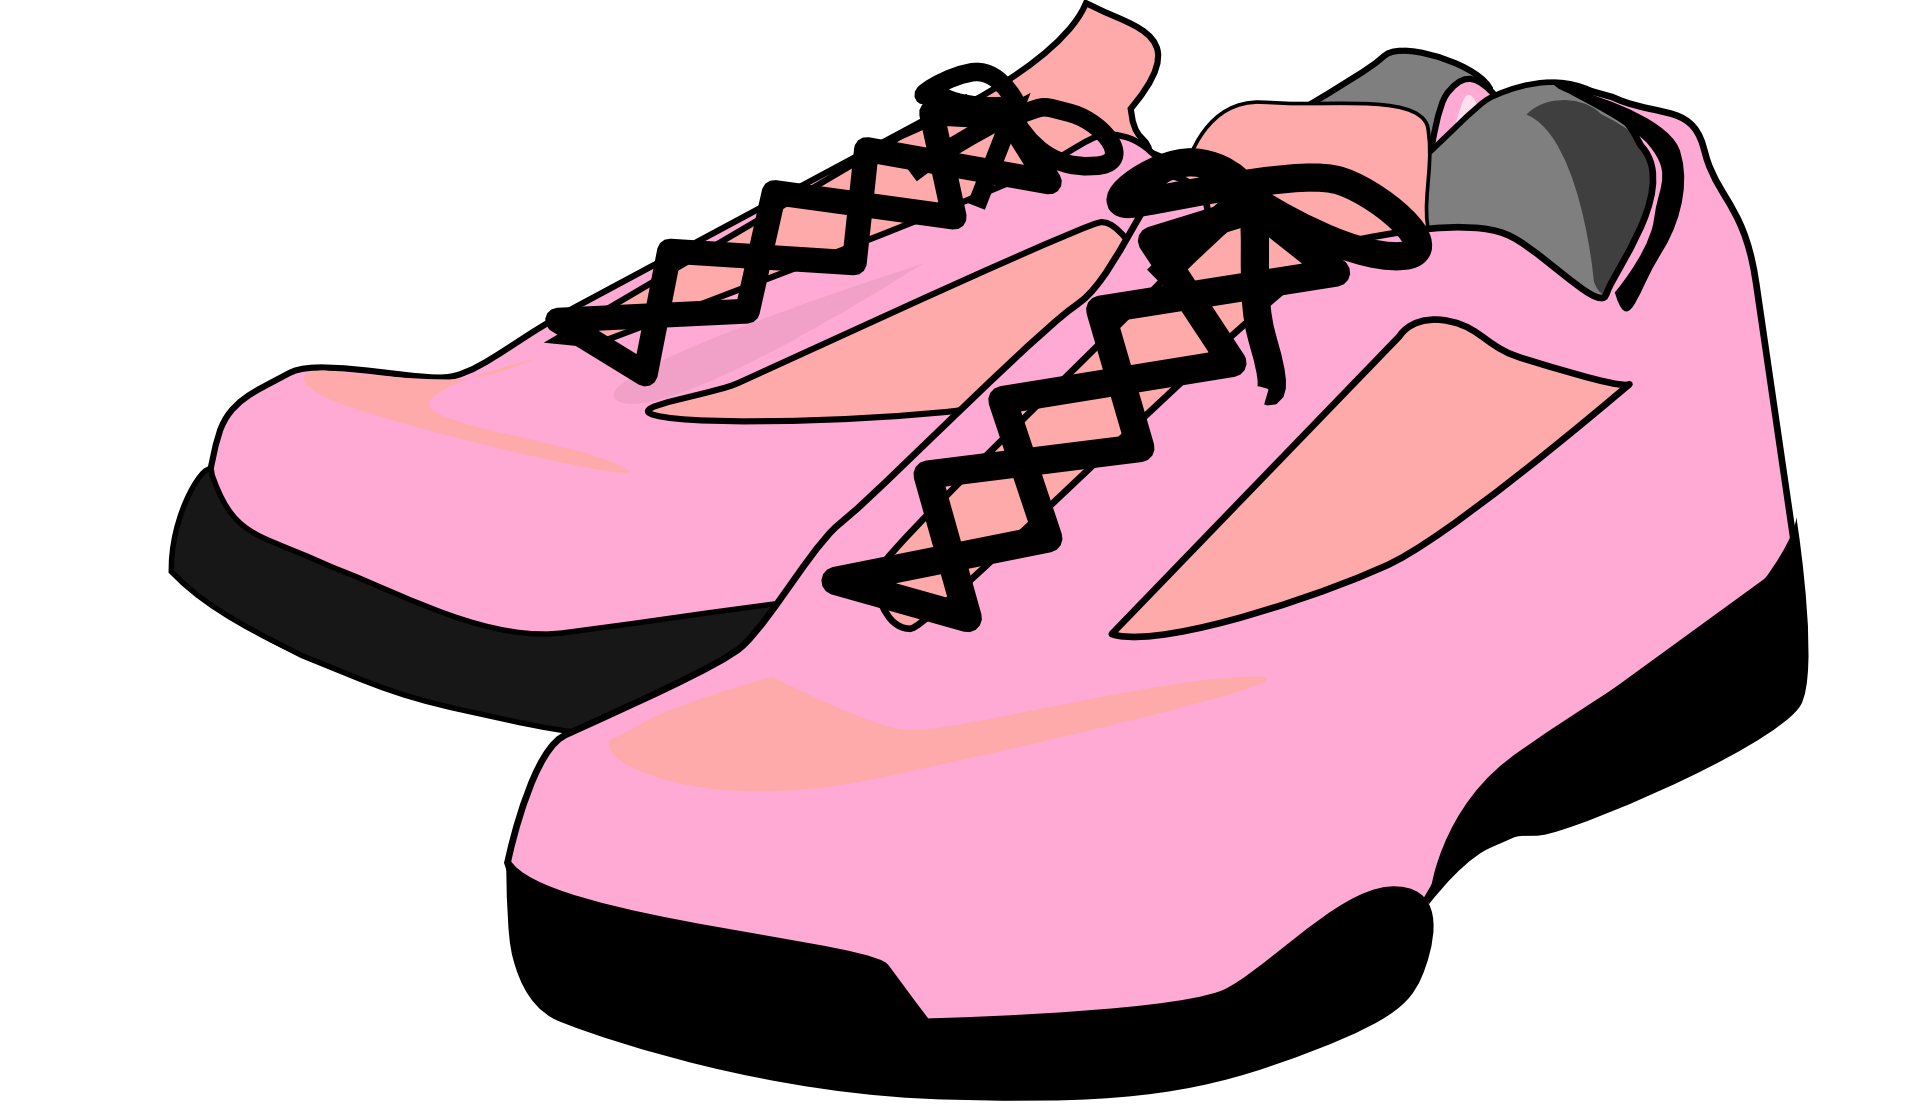 Trainers pink shoes drawing free image download